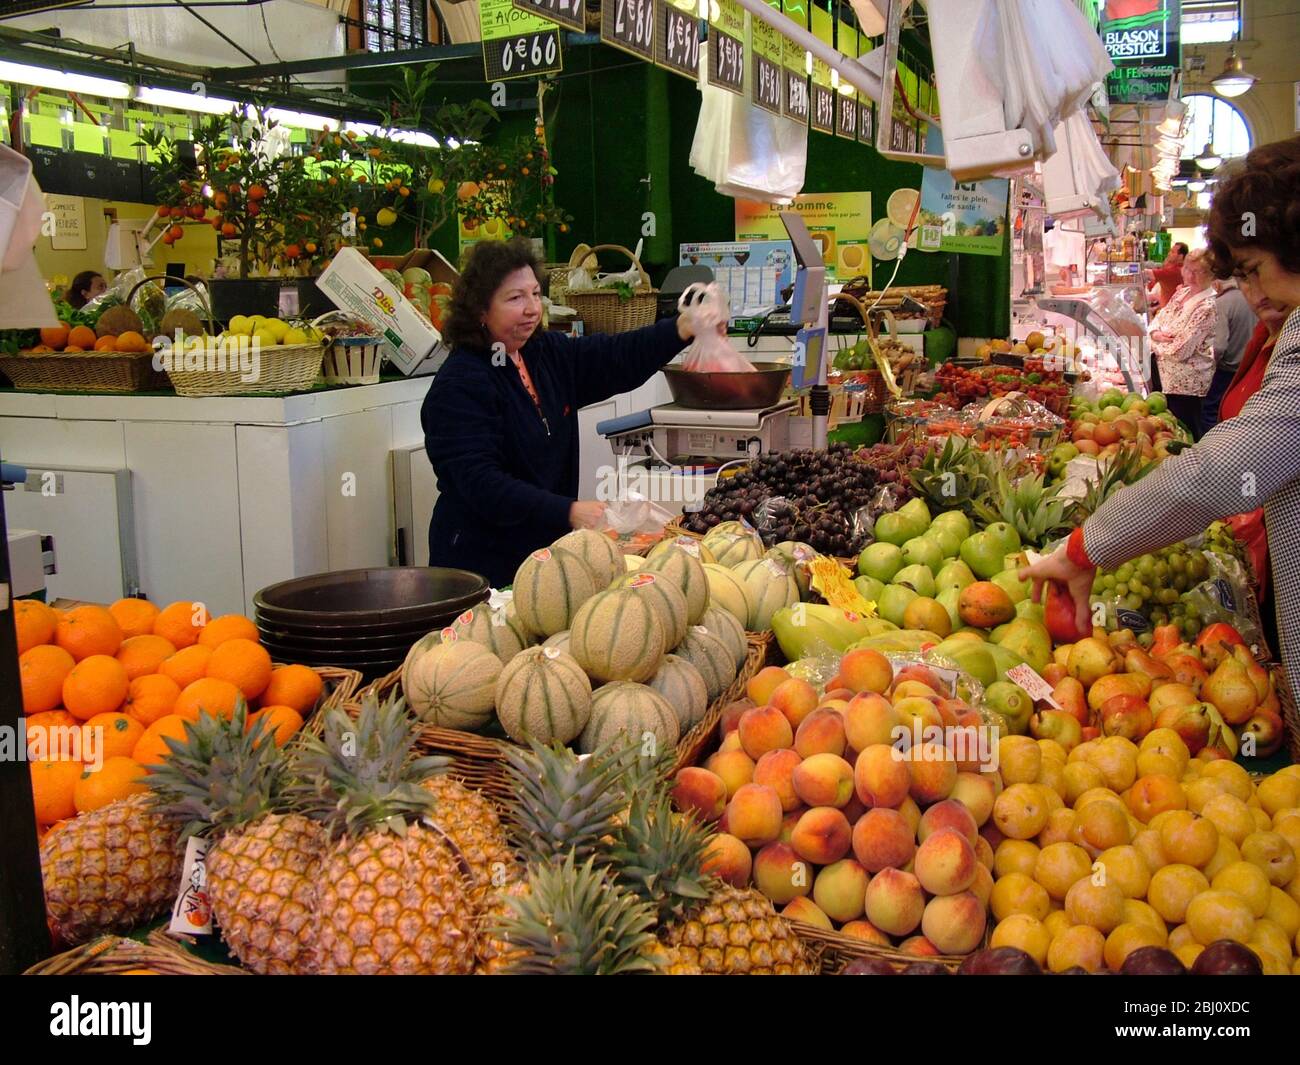 Display of fresh fruits at stall in covered market in Menton, south of France - Stock Photo